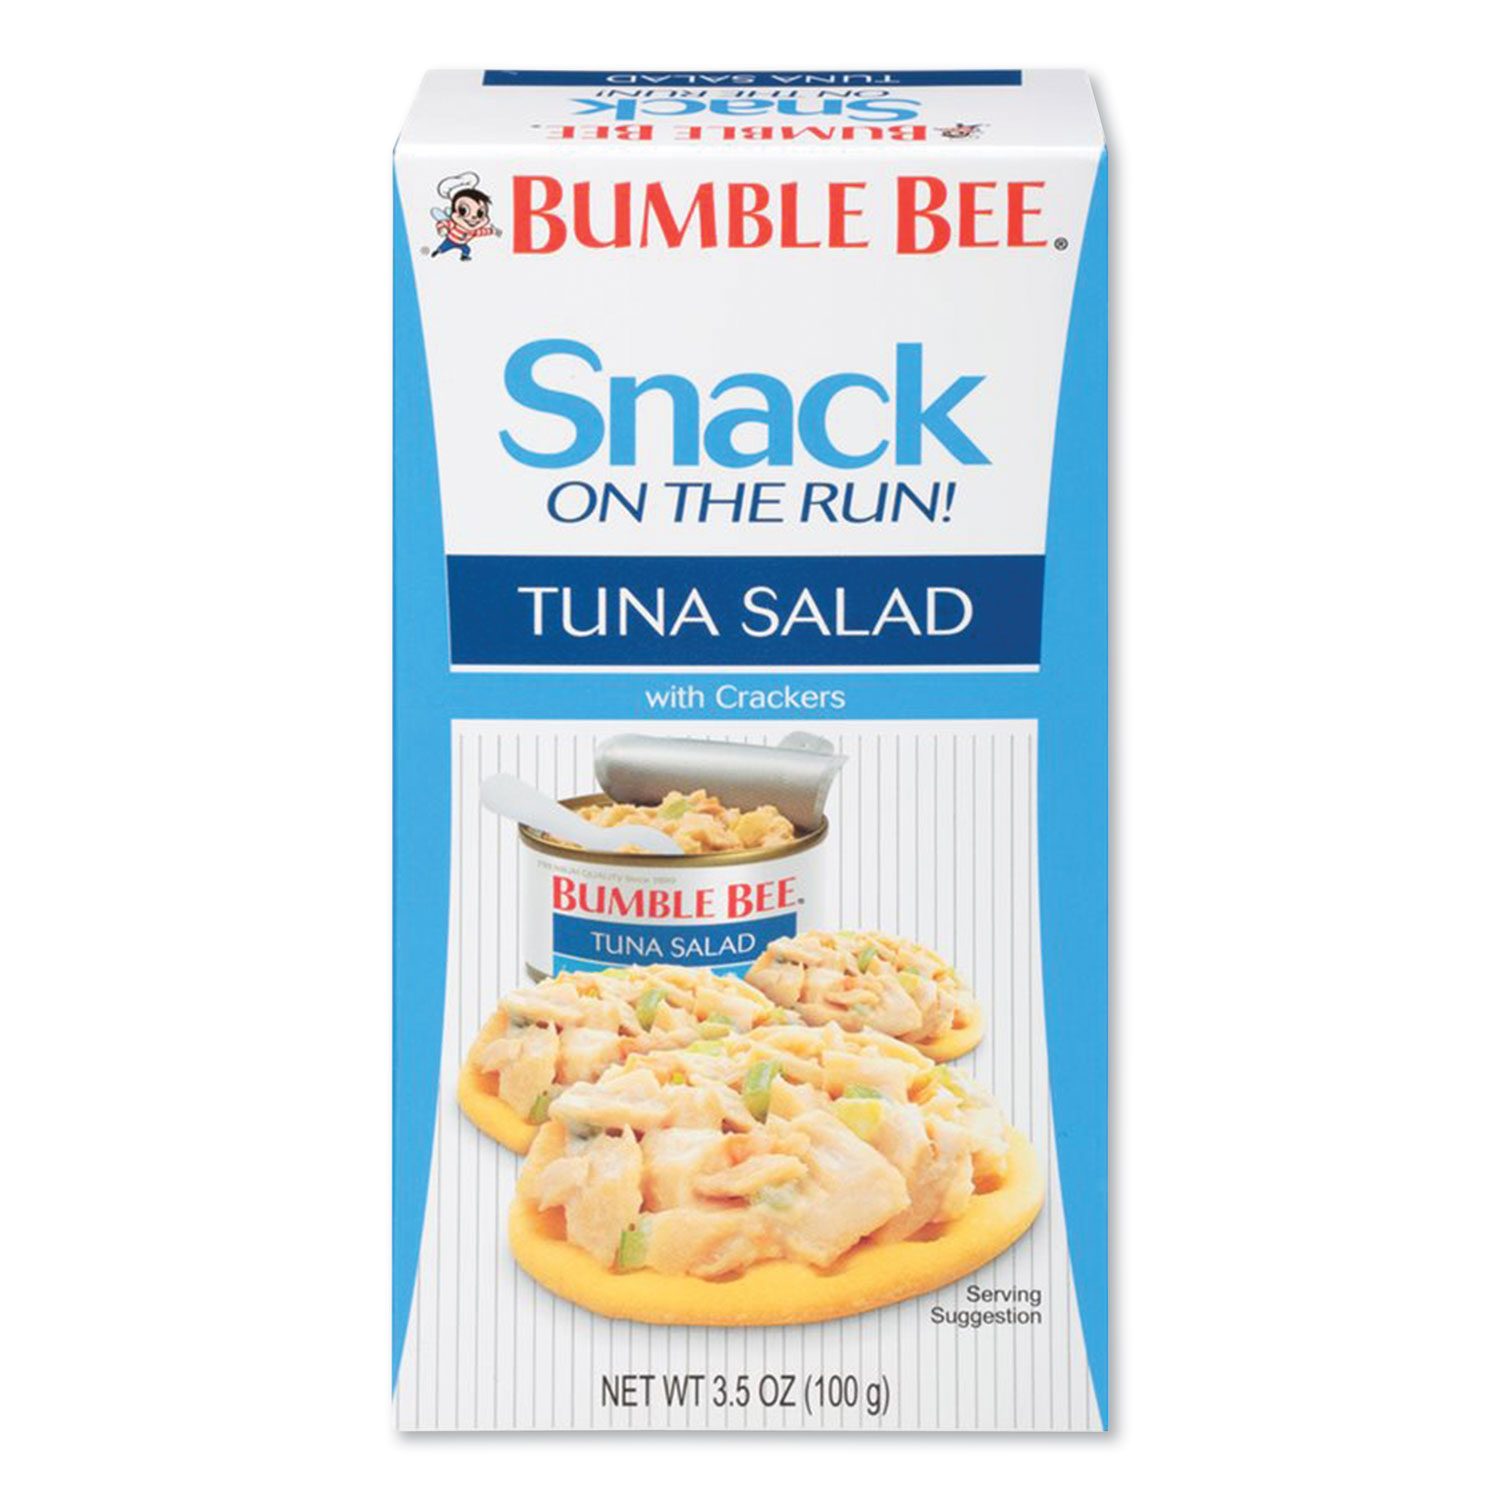  Bumble Bee AHF70777 Snack on the Run Tuna Salad with Crackers, 3.5 oz Pack, 12/Carton (BBY618556) 